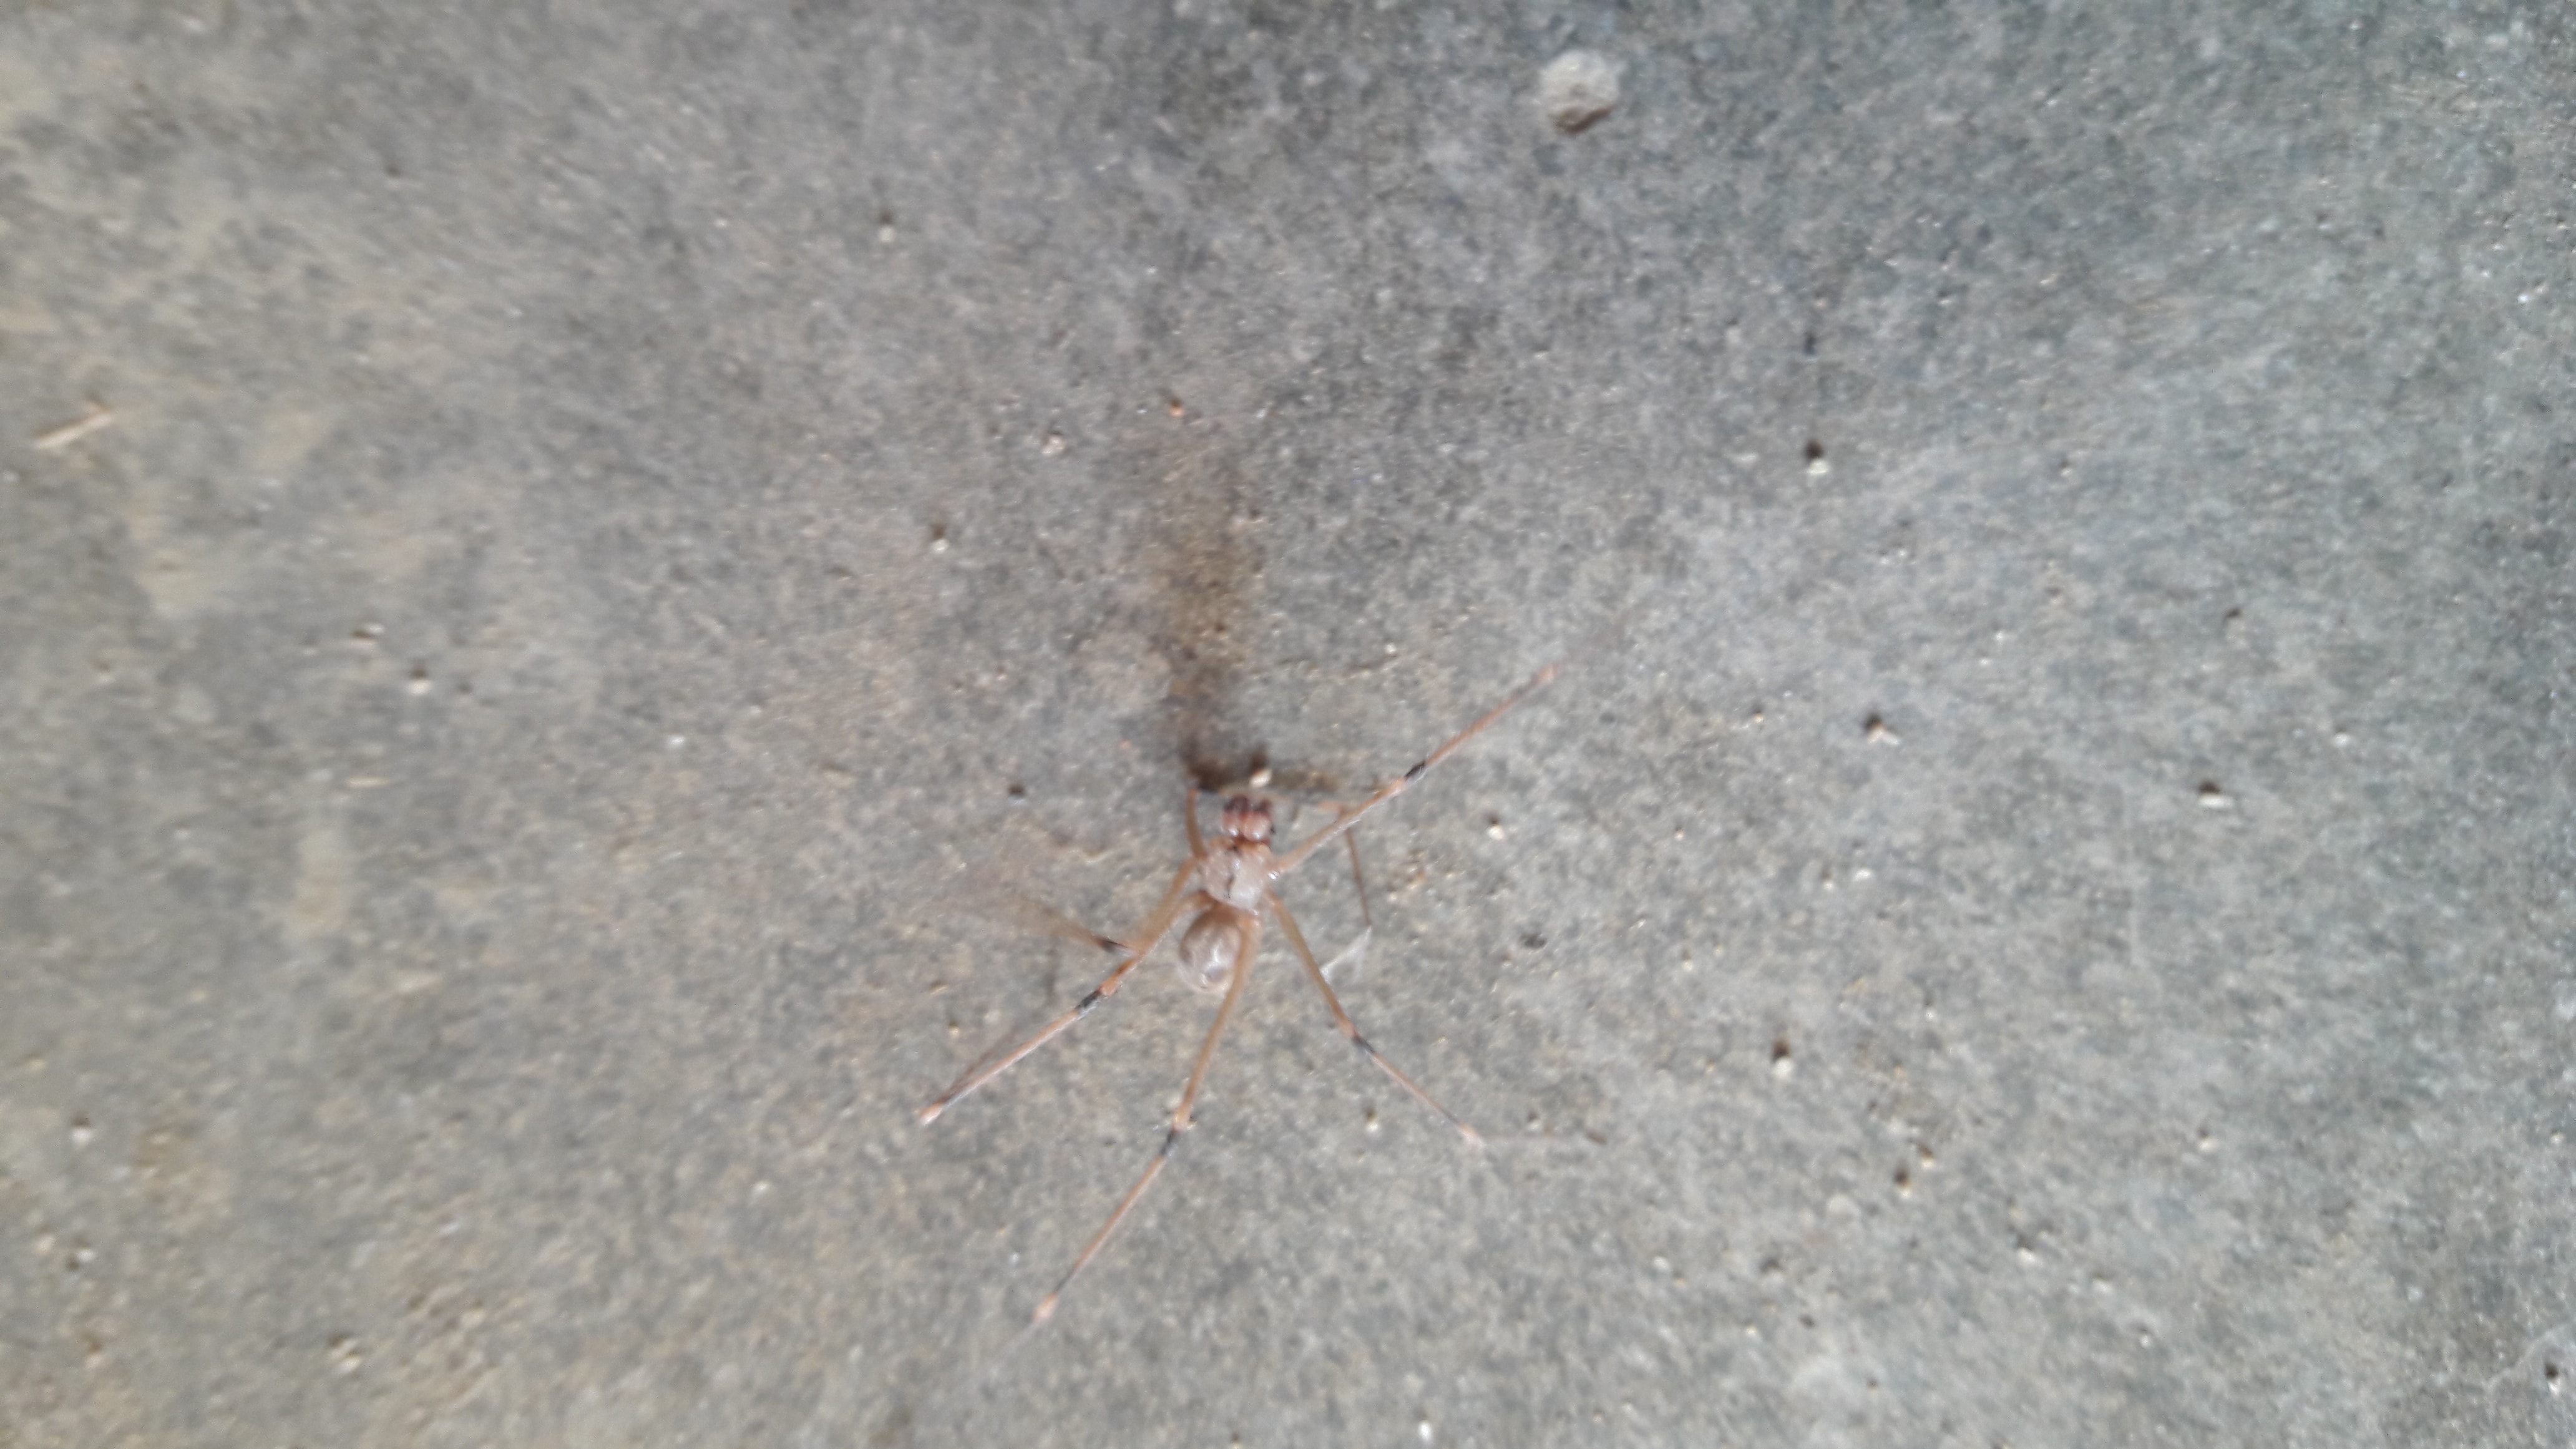 Picture of Pholcidae (Cellar Spiders) - Male - Dorsal